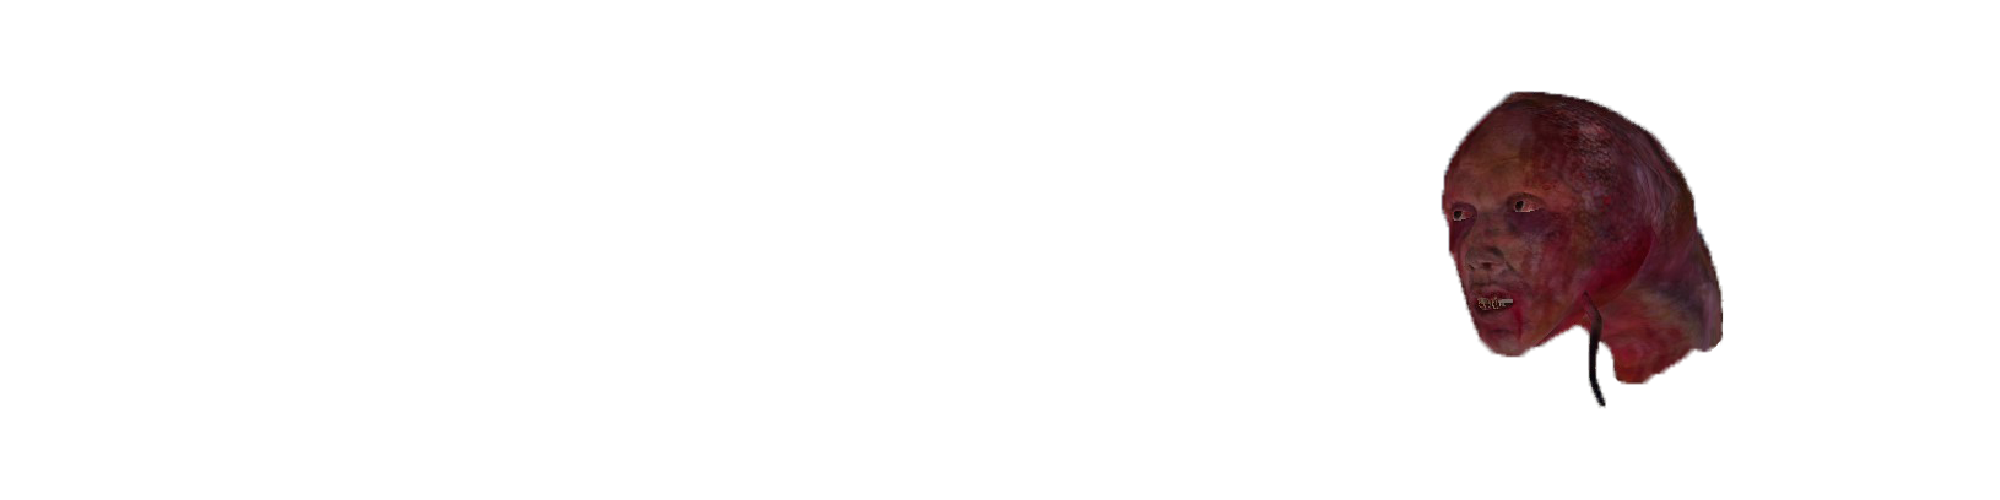 Escape from the Shadows: Prey Hunt